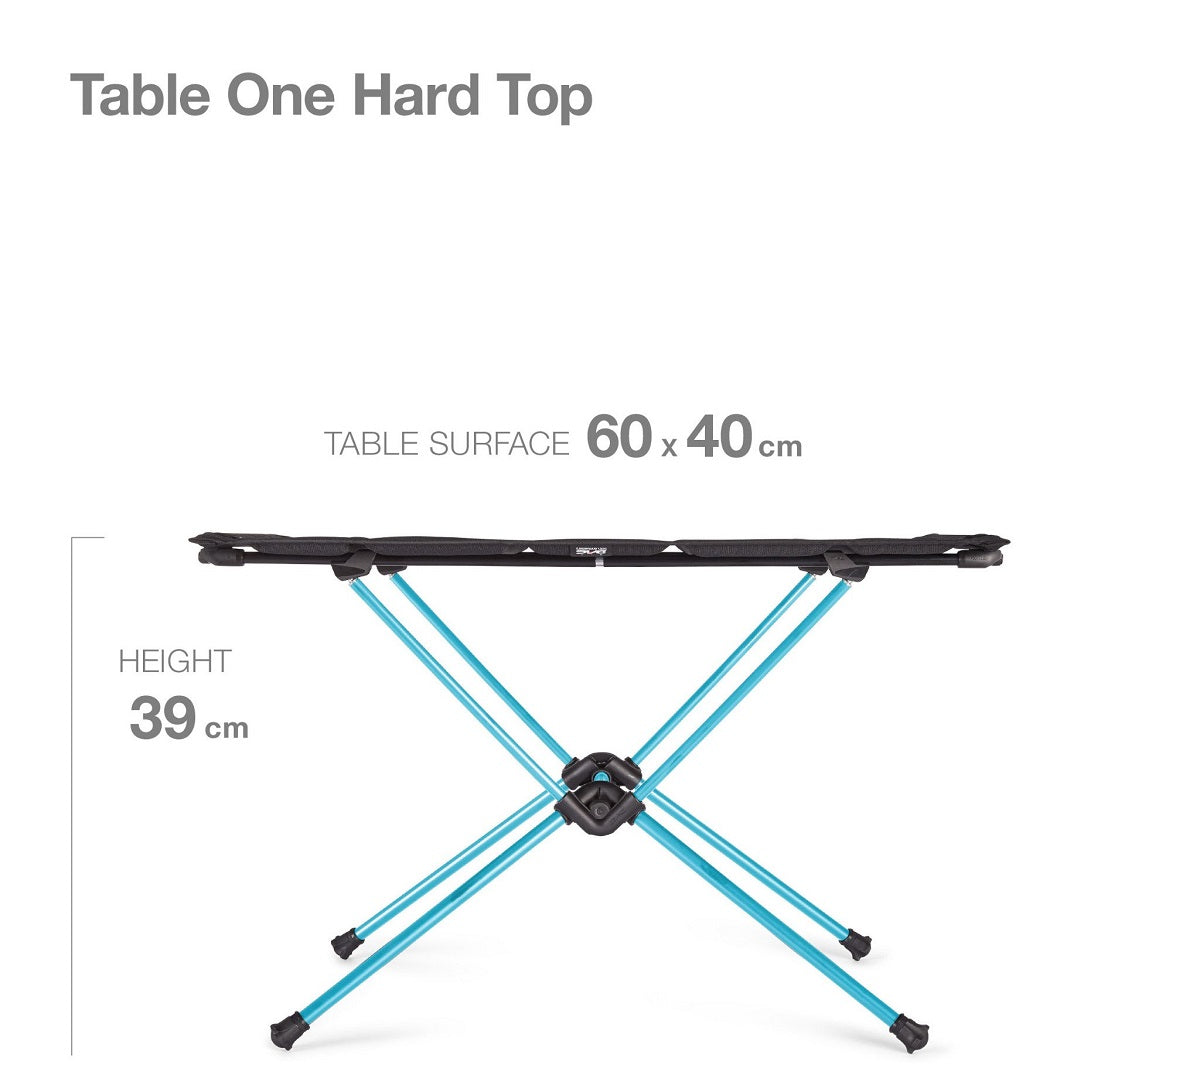 Helinox Table One Hard Top overview